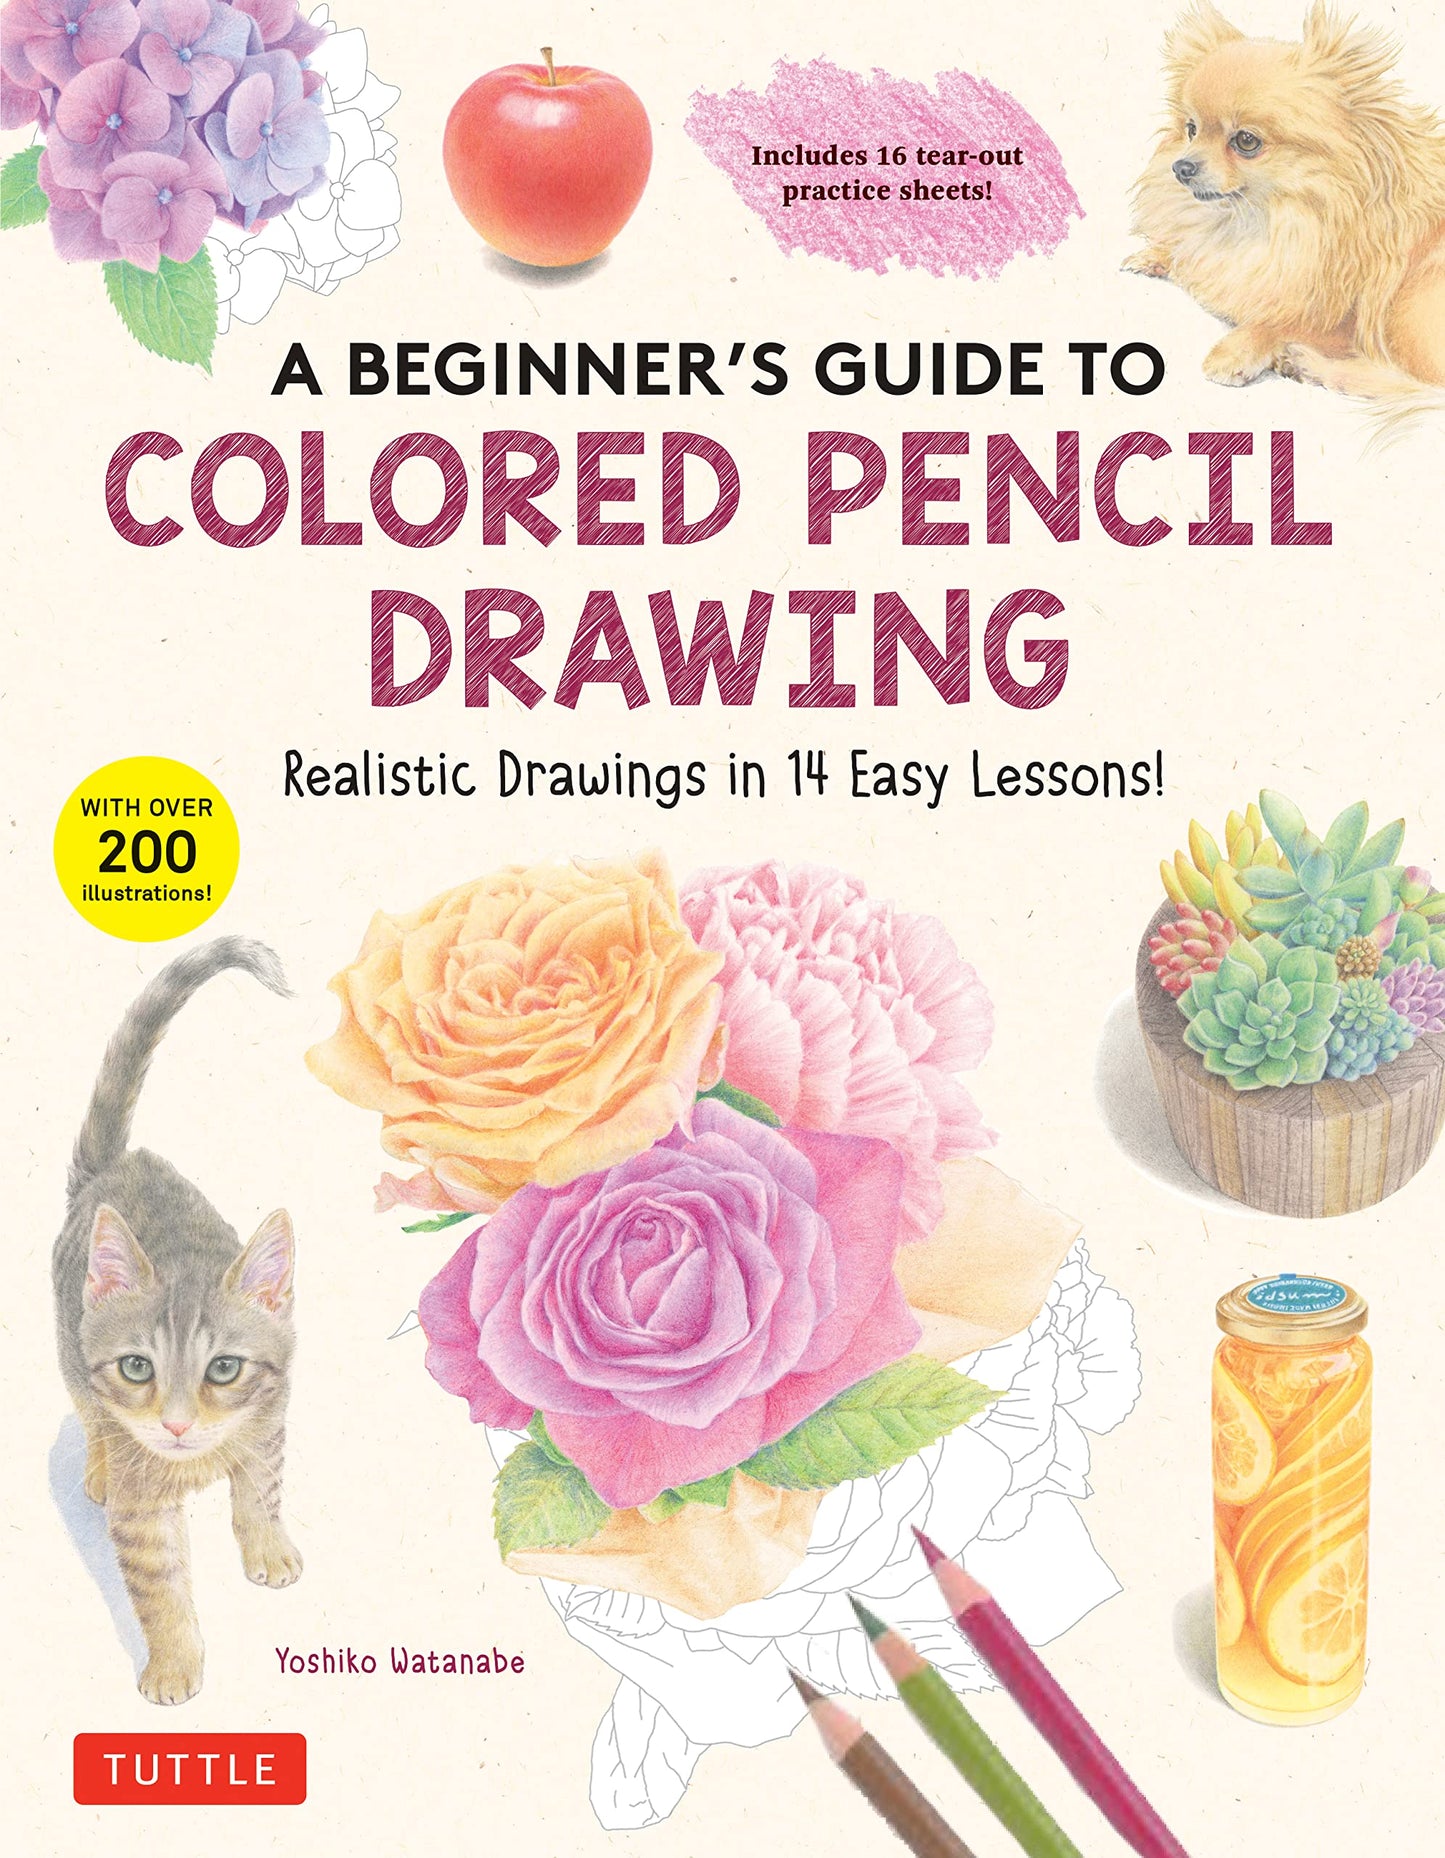 A Beginner's Guide to Colored Pencil Drawing: Realistic Drawings in 14 Easy Lessons! (With Over 200 illustrations)